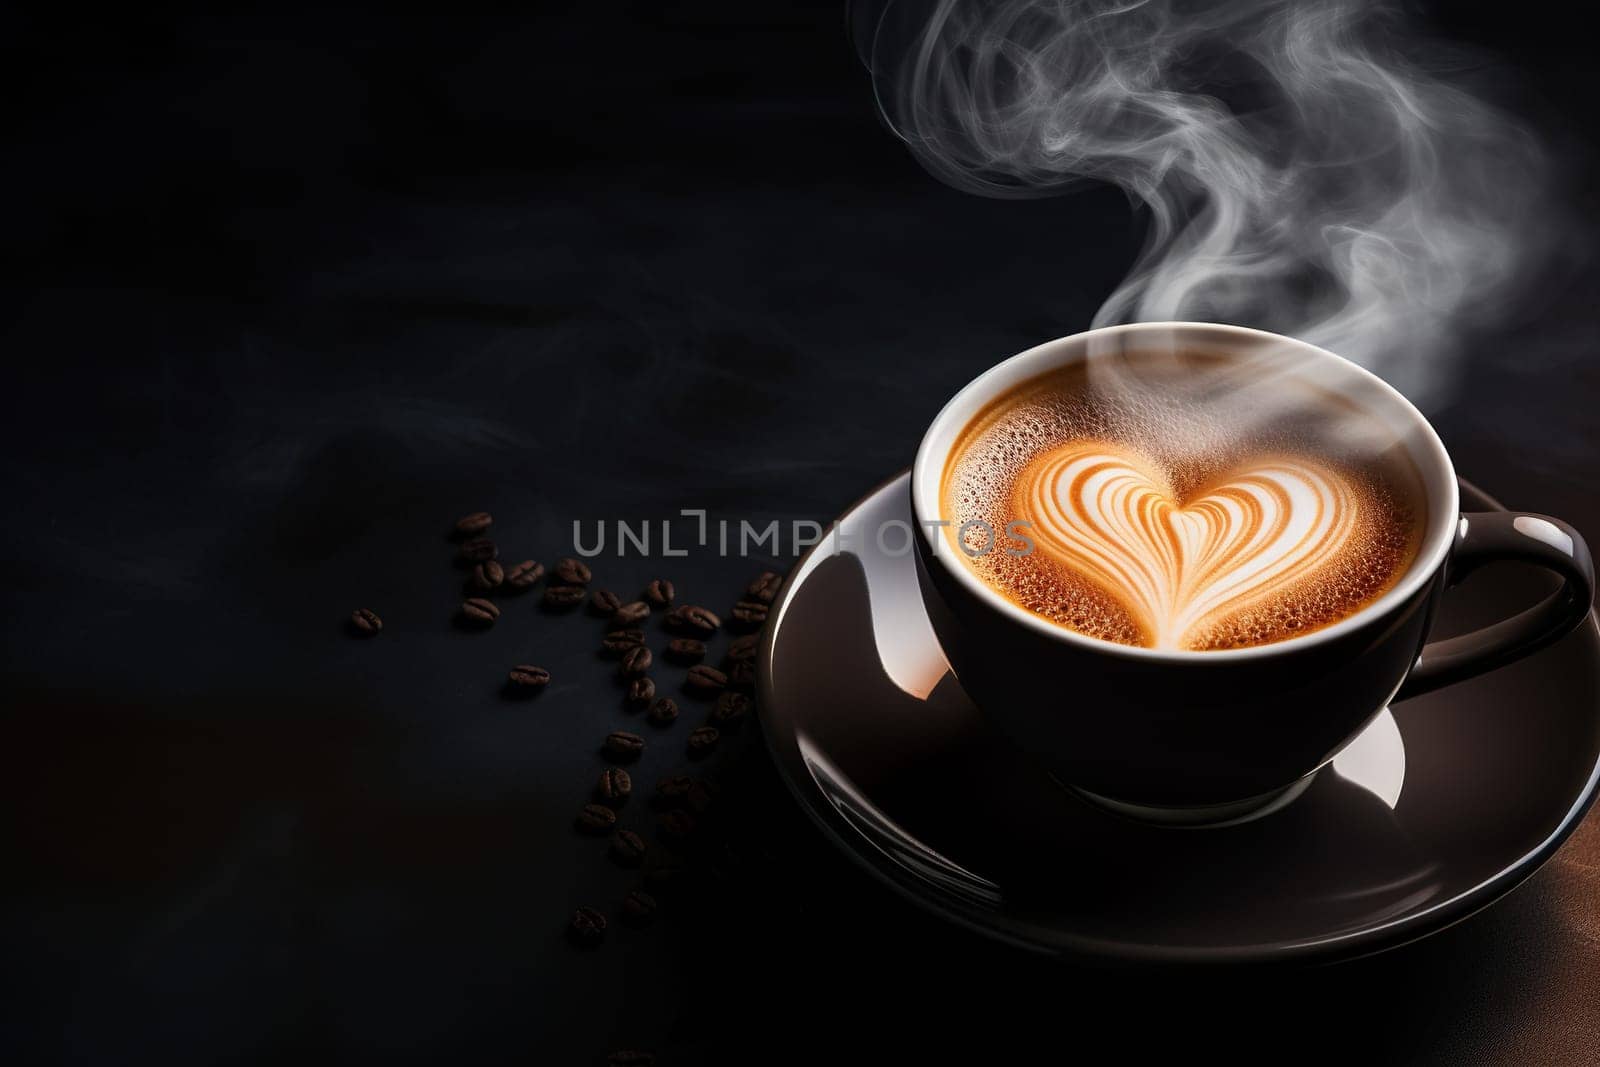 Coffee cup with latte art and steam over a cup on a wooden tabletop. Generated by artificial intelligence